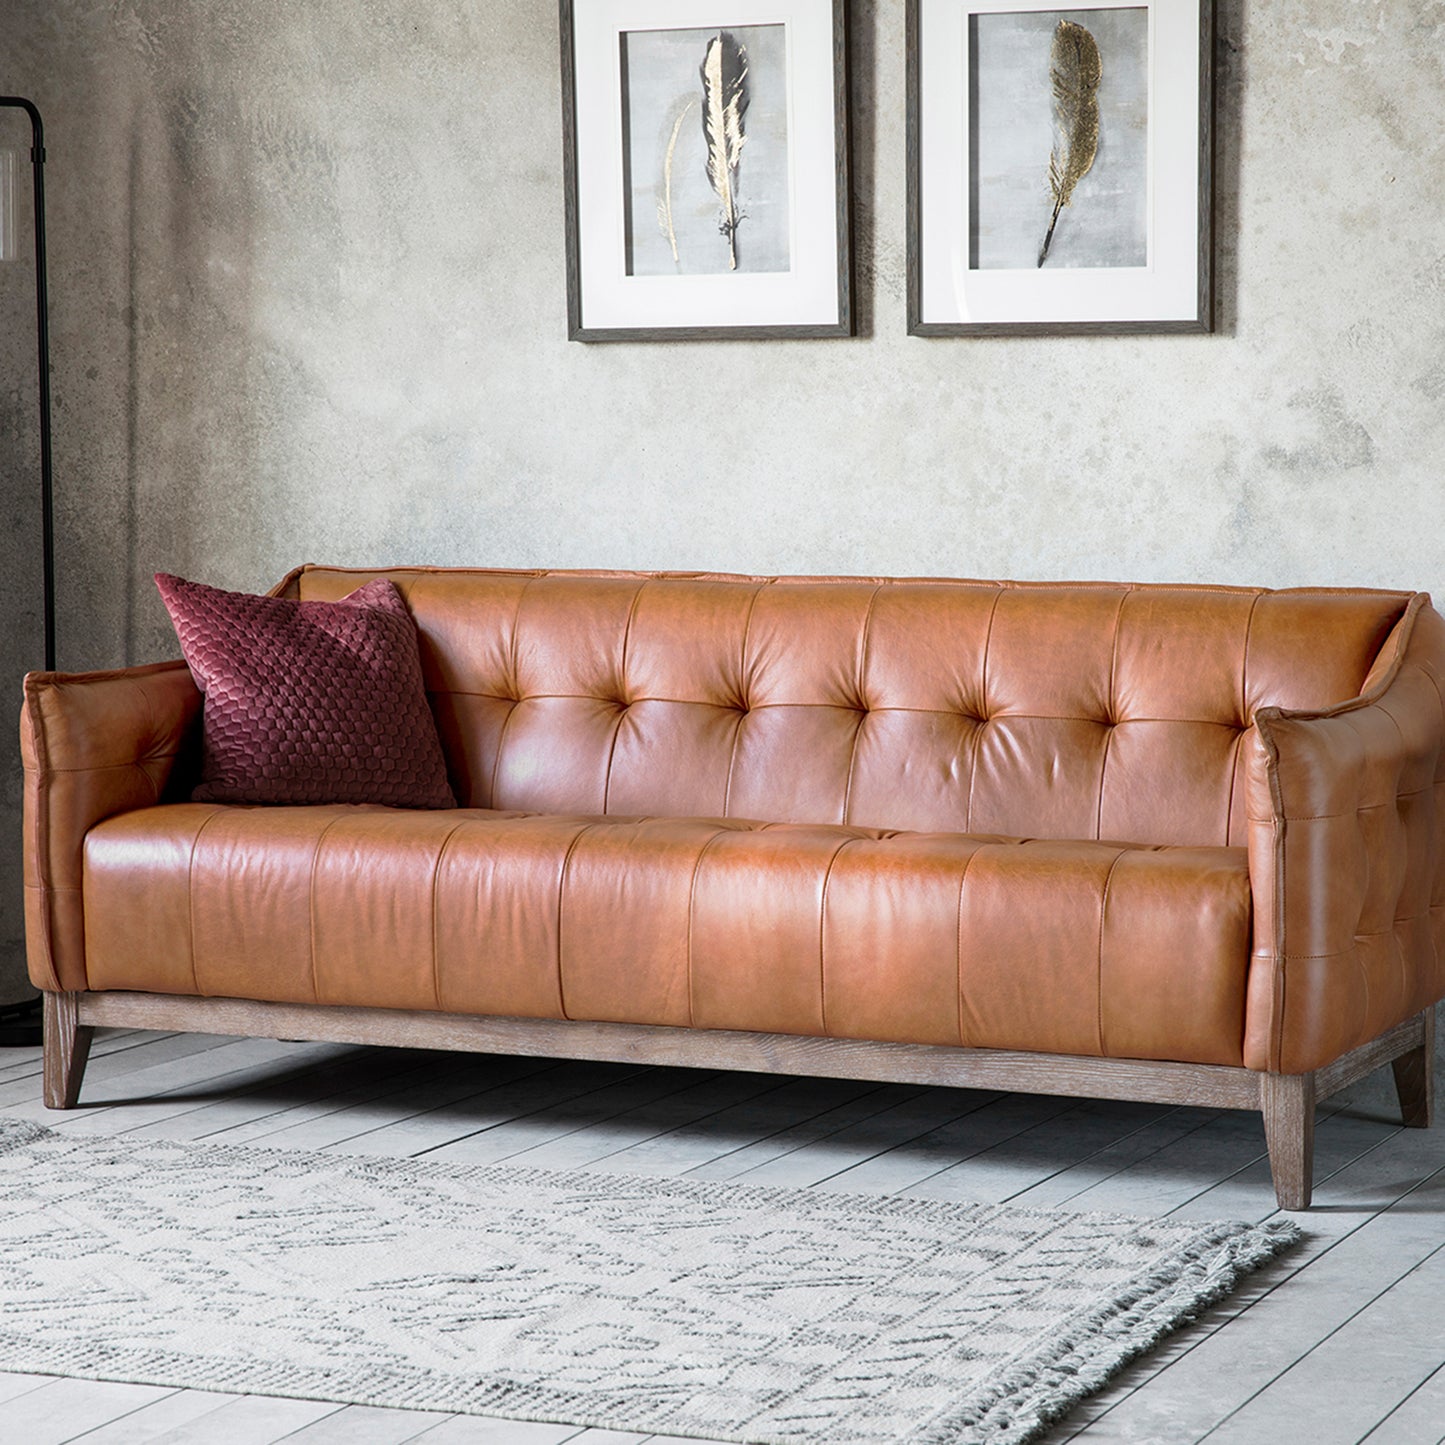 A Loddiswell Sofa in a living room, adding style and comfort to your interior decor.